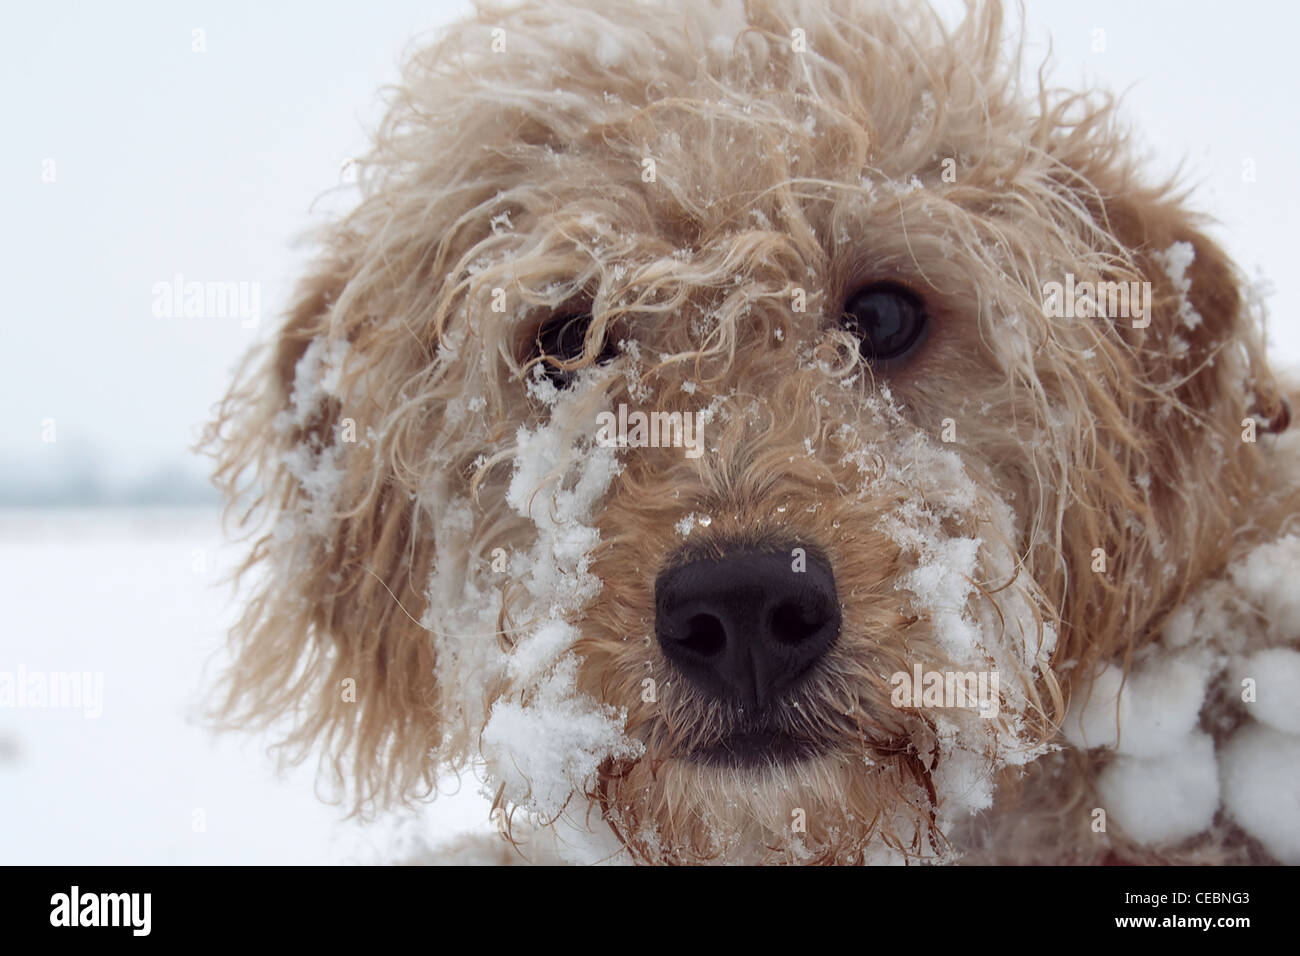 Snow Resolution Stock Images - Alamy